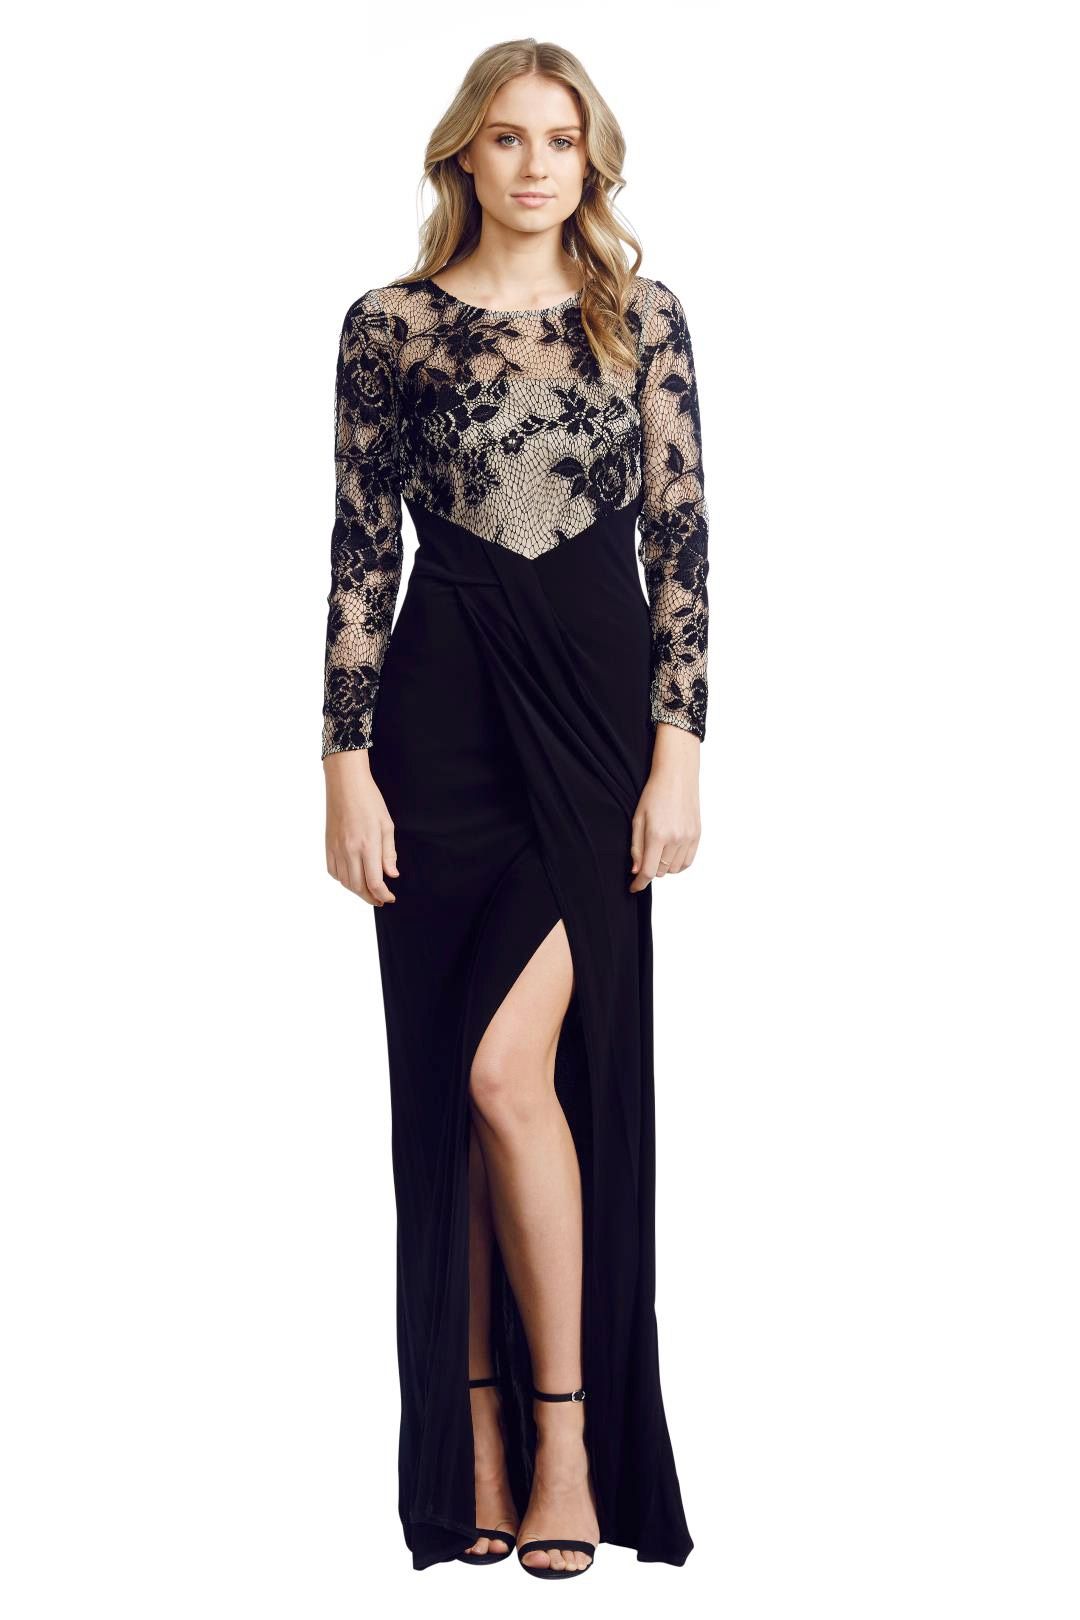 David Meister - Illusion Lace Gown - Black - Front